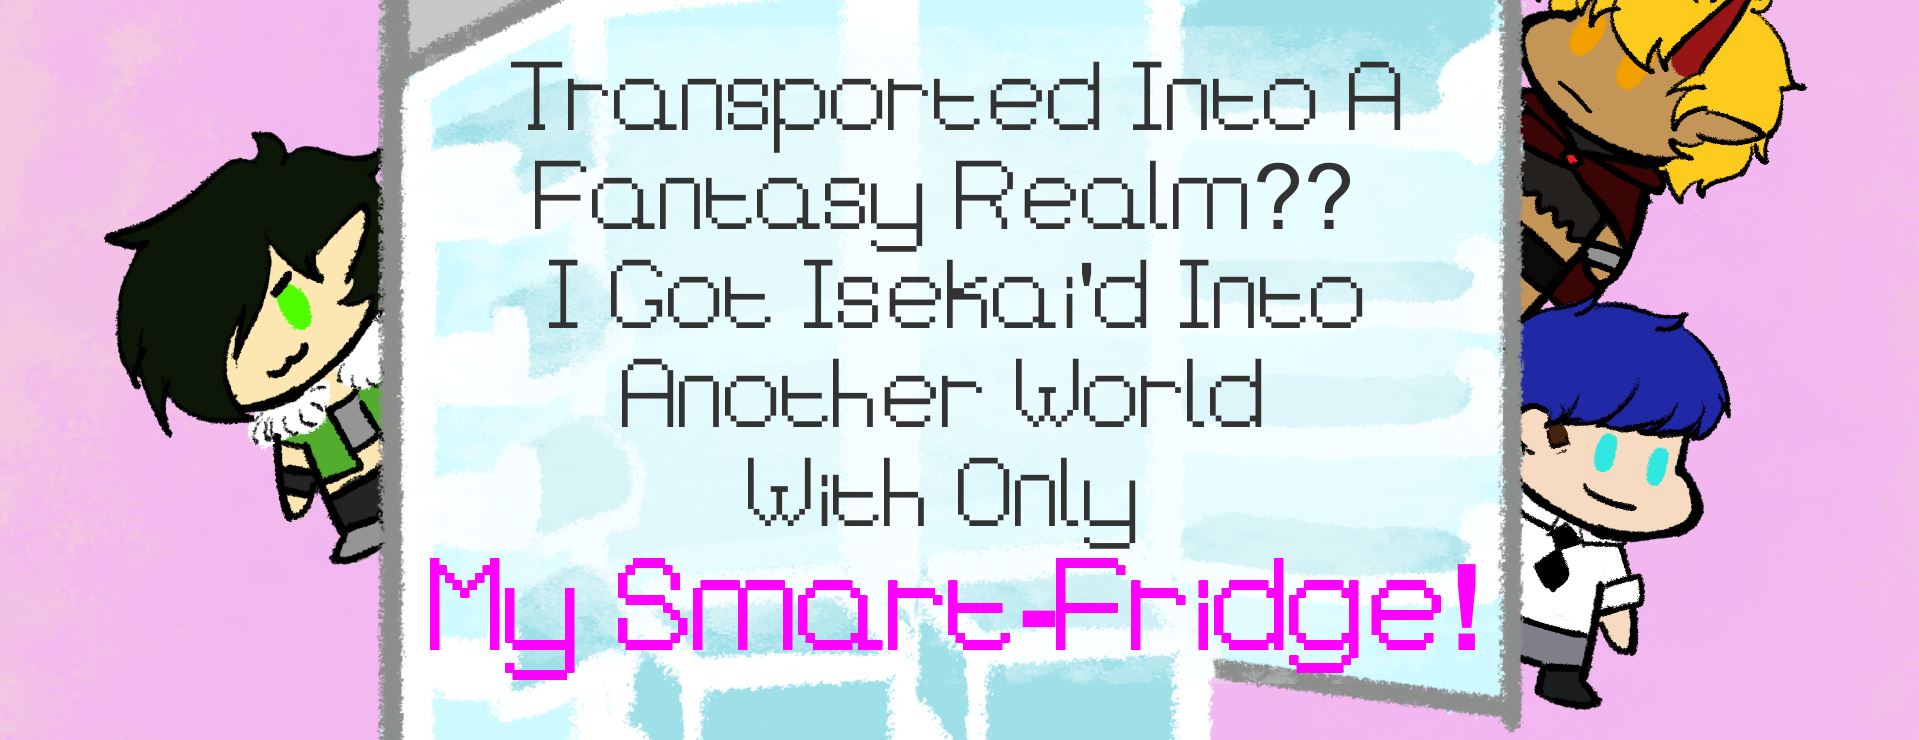 Transported Into A Fantasy Realm?? I Got Isekai'd Into Another World With Only My Smart Fridge!